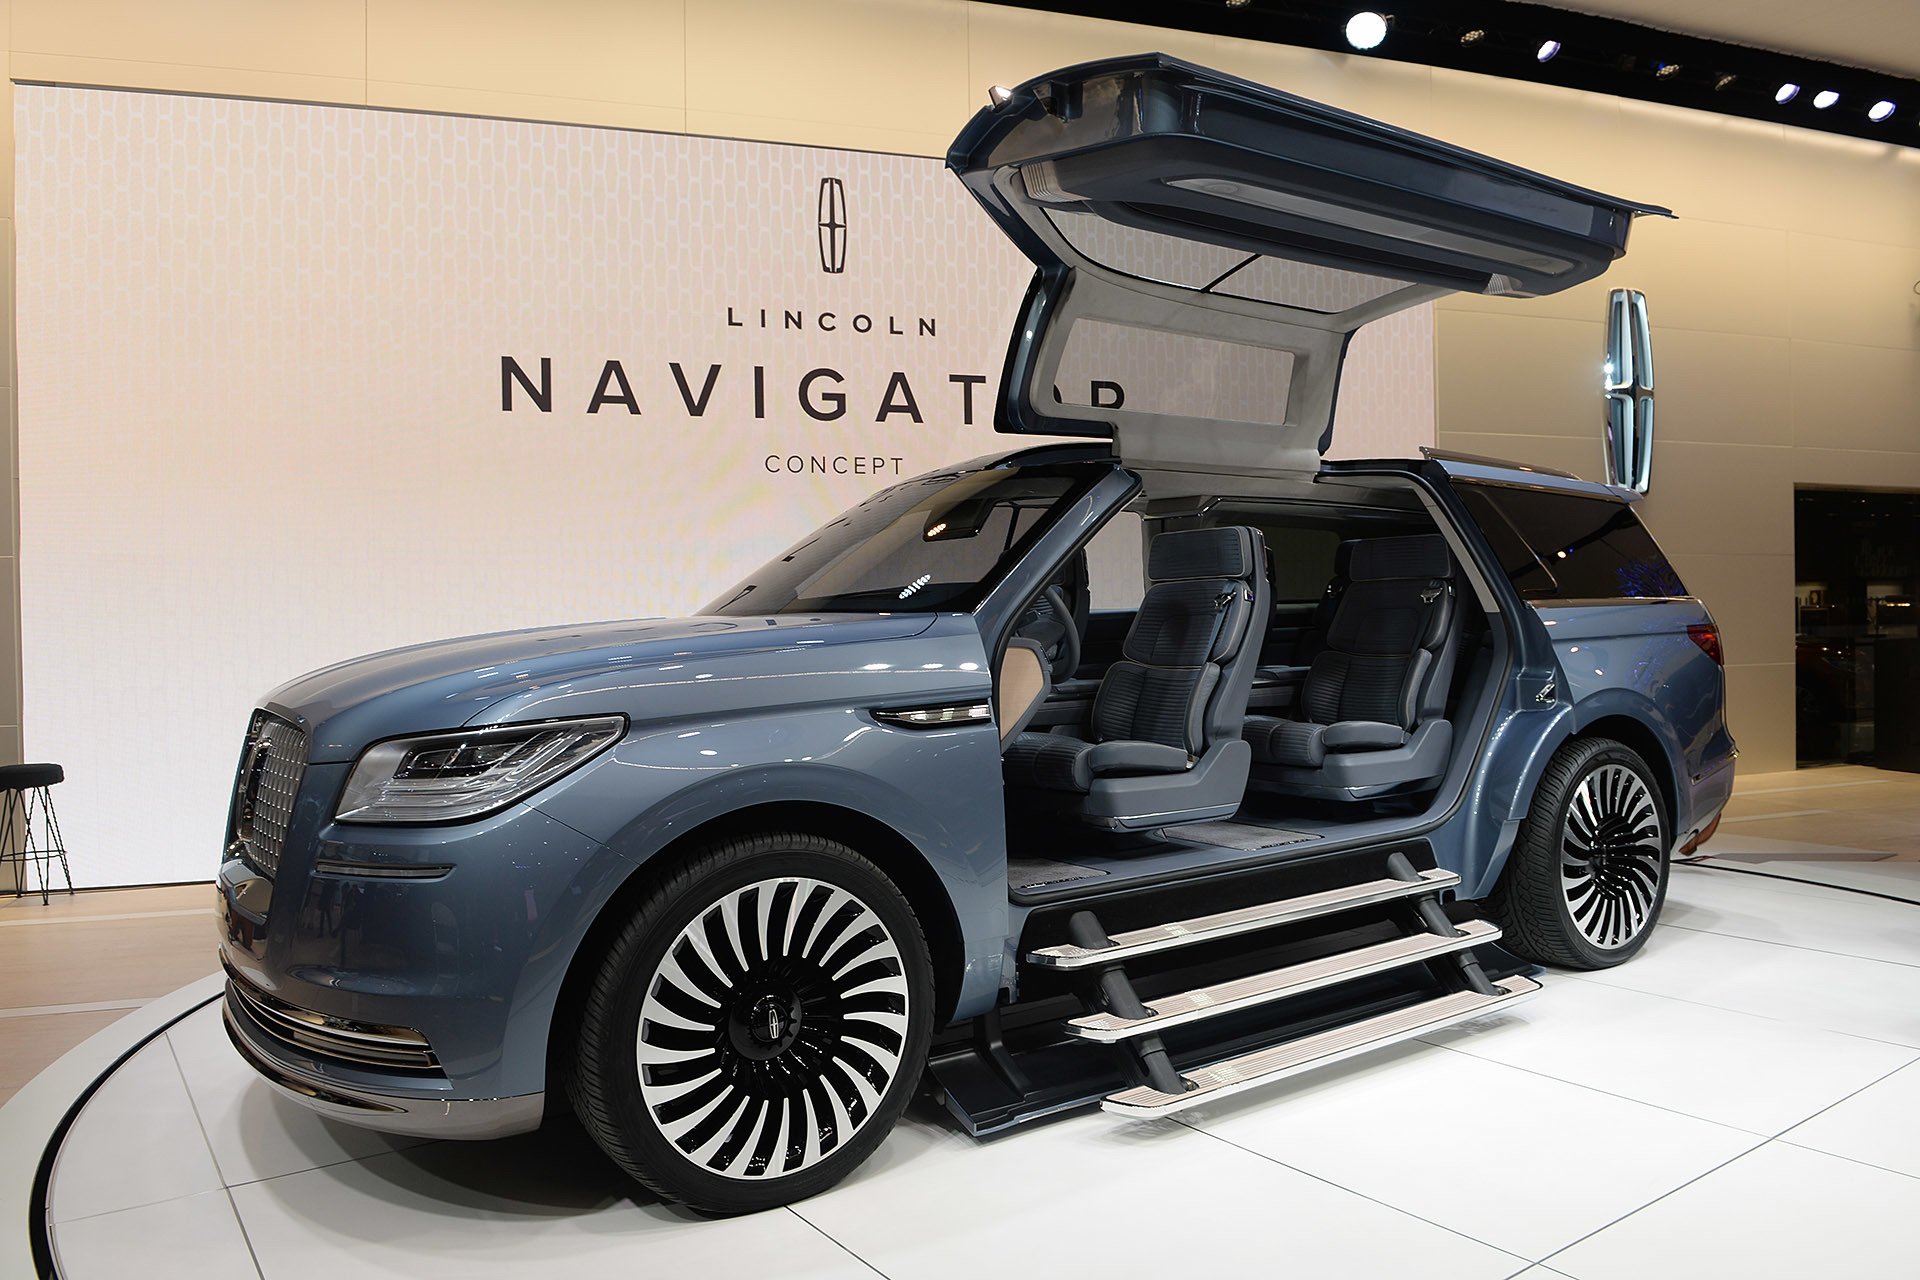 From Expedition to Navigator: our predictions for Lincoln's SUV - Autoblog